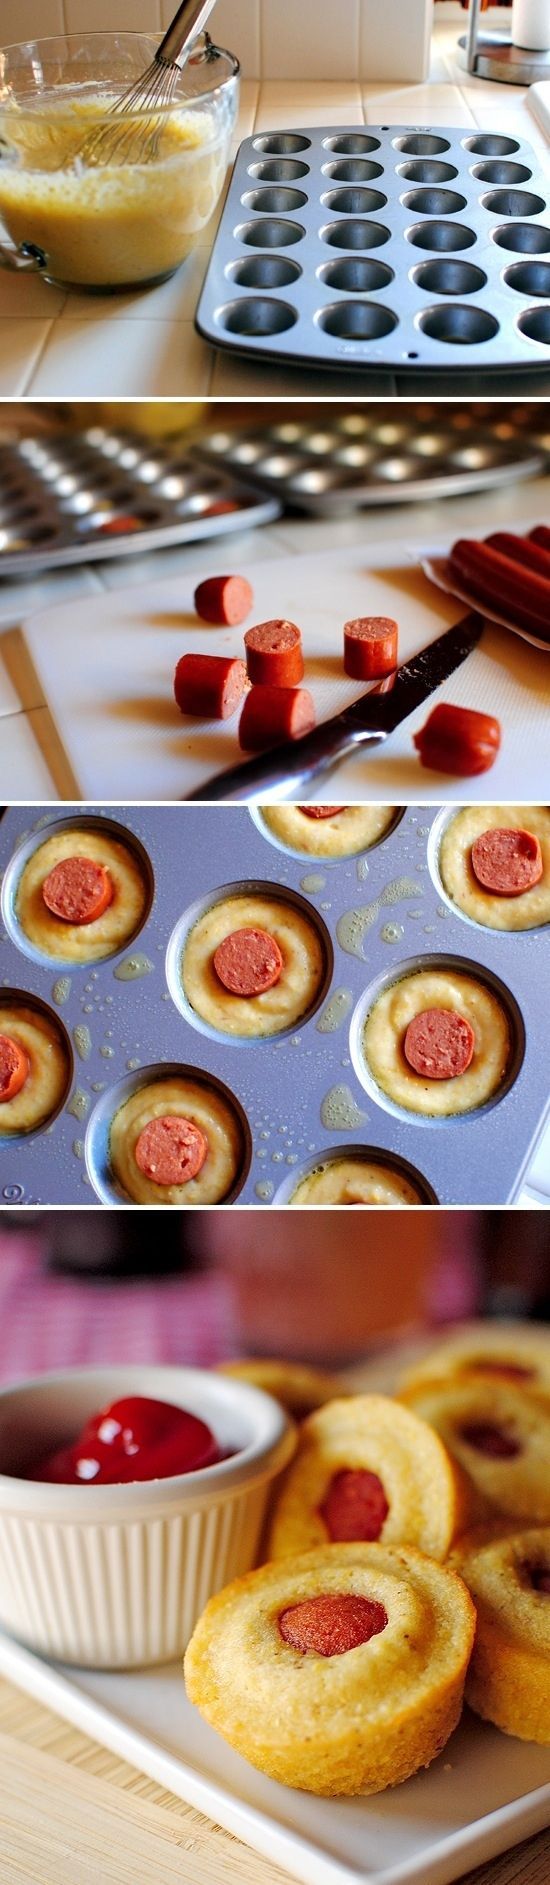 Mini Corn Dog Muffins | 24 Awesome Muffin Tin Recipes. I don’t normally eat this sort of food, but every once in a while you just